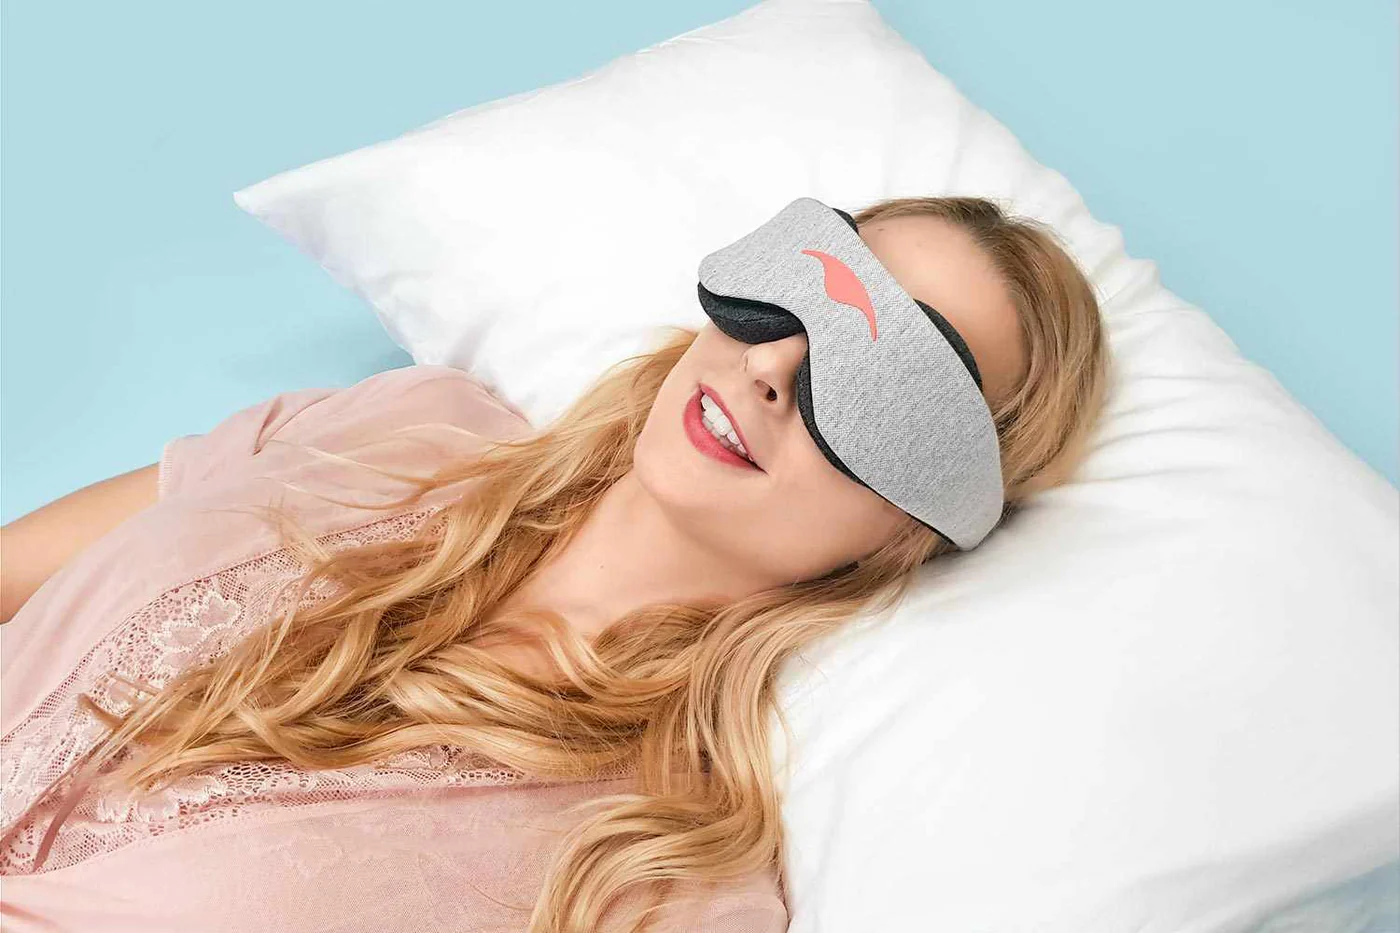 A blonde girl lying down on a white pillow, wearing a gray sleep mask with eye cups.